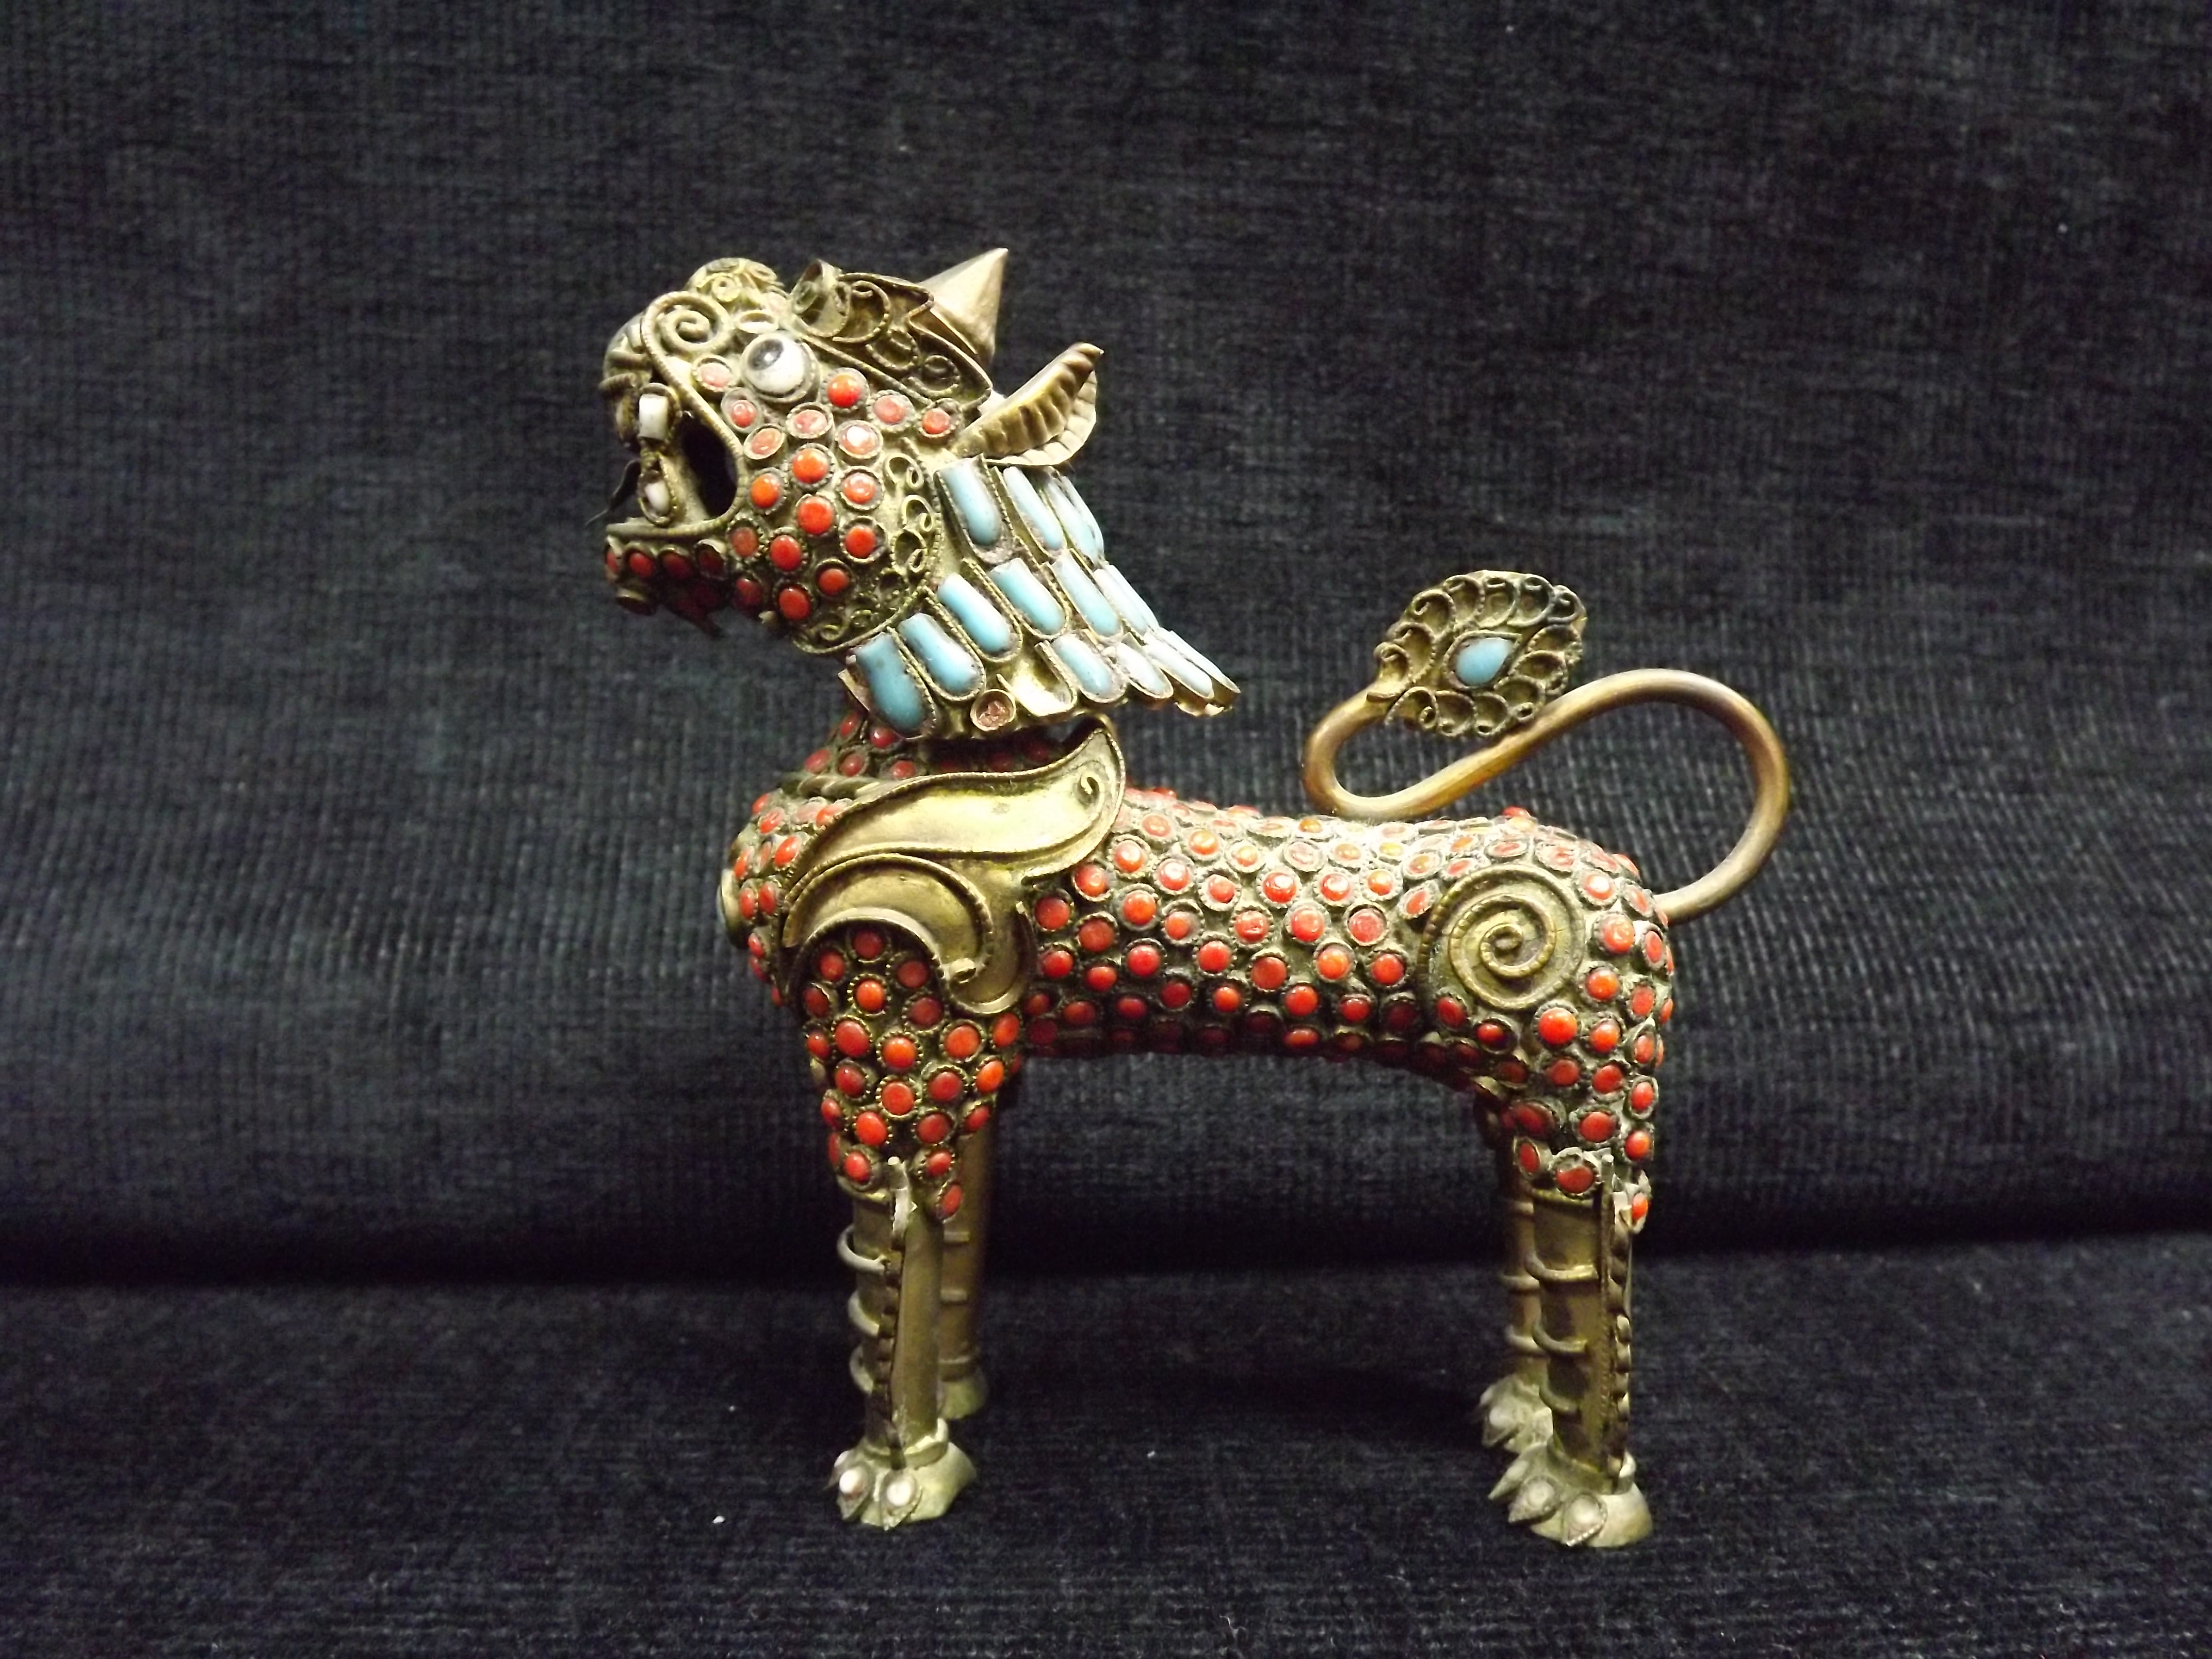 Chinese Gilt Metal and Cloisonne Enamel Qilin Figure. Fine detail, stone or glass eyes. White - Image 3 of 7